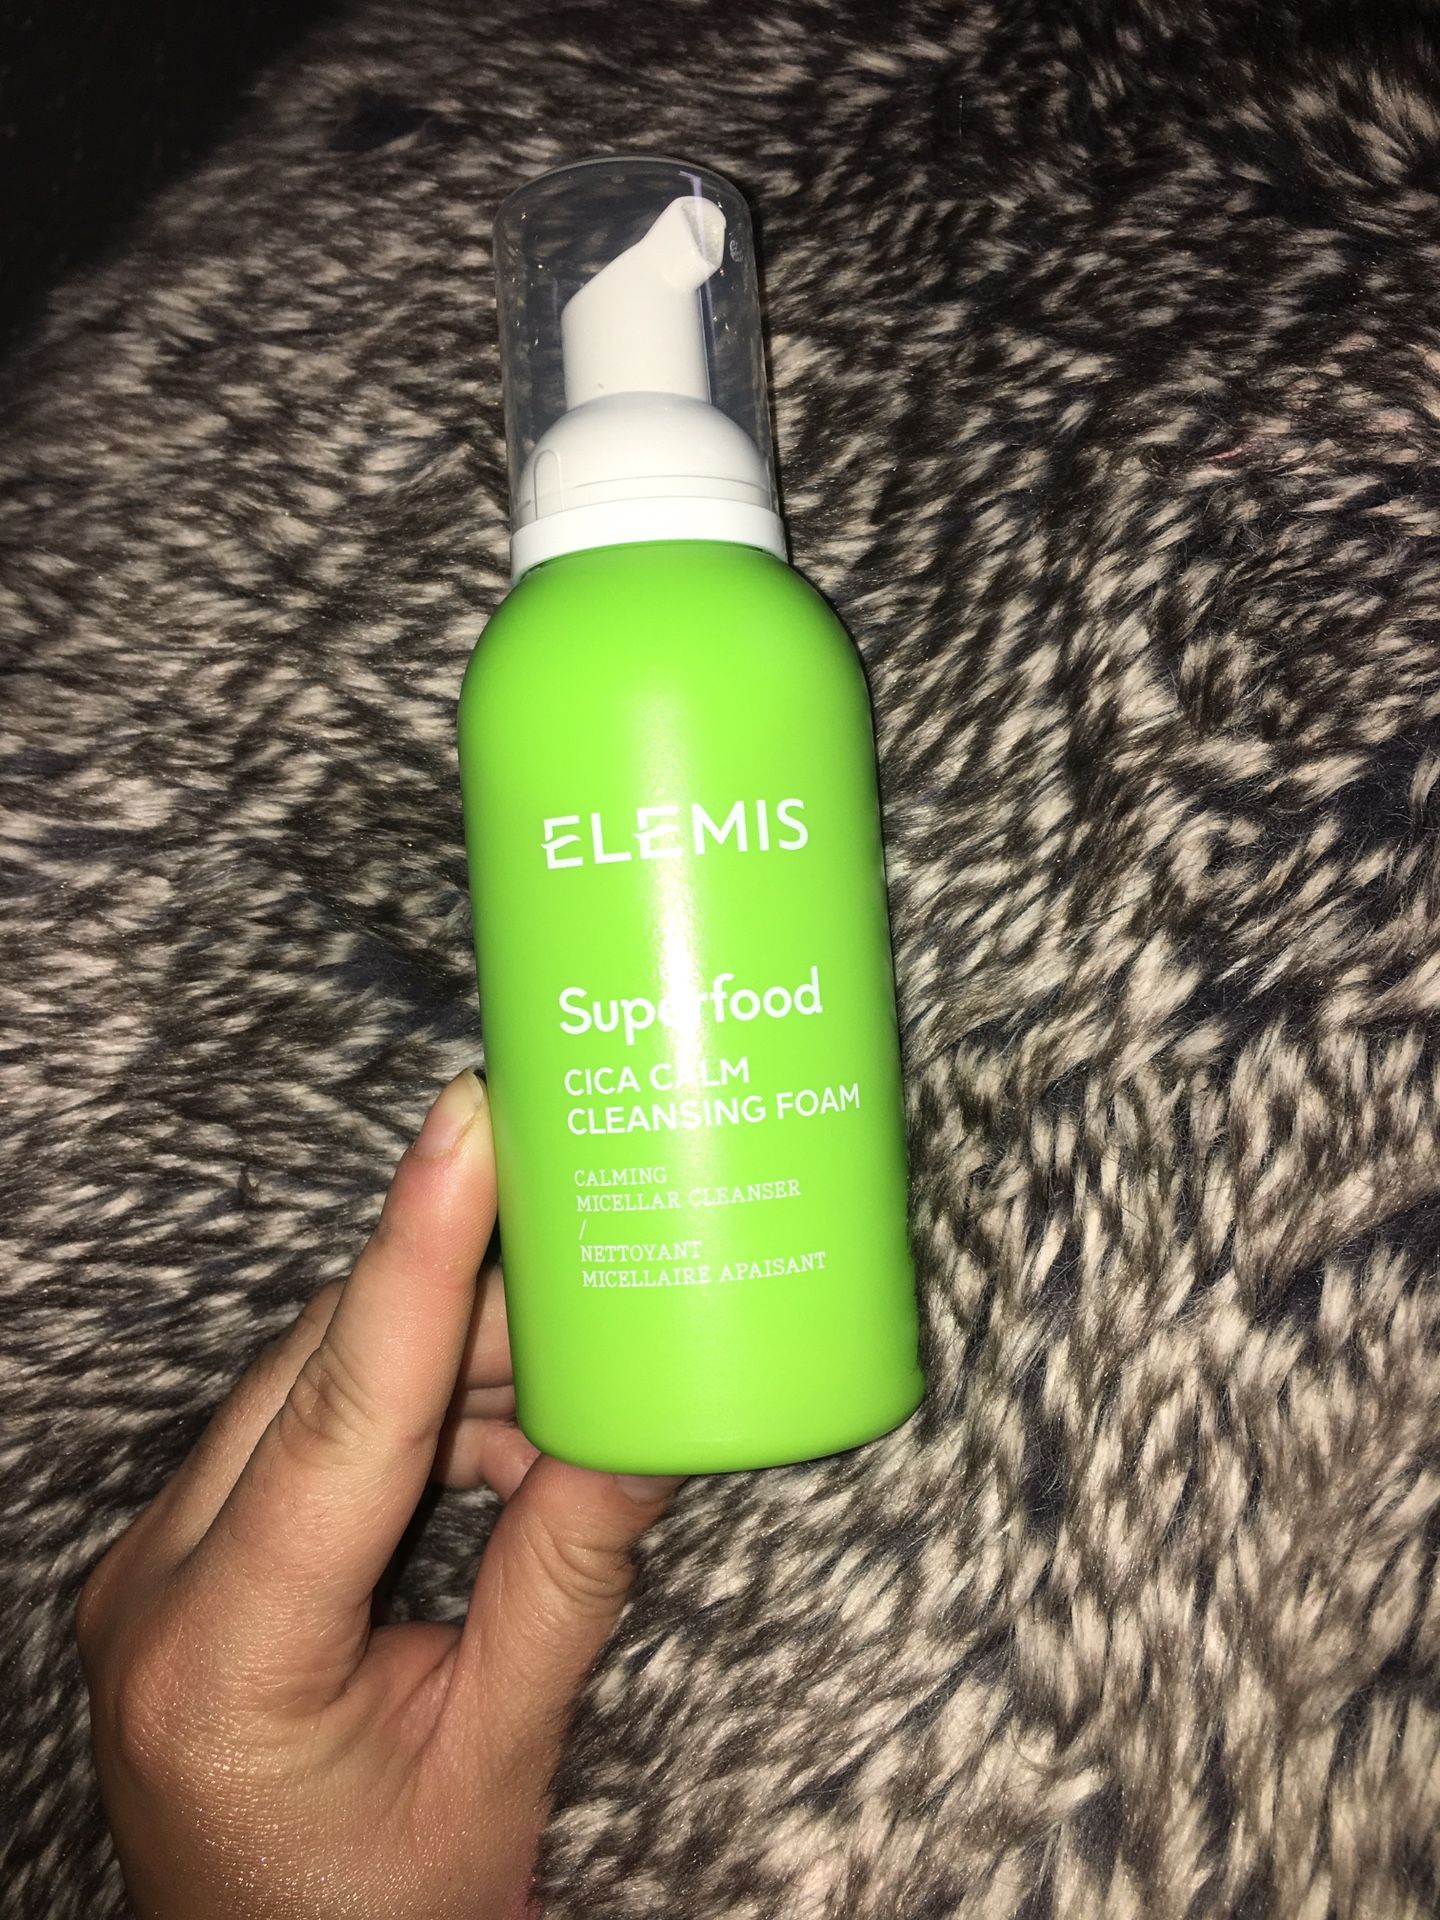 High end face cleanser